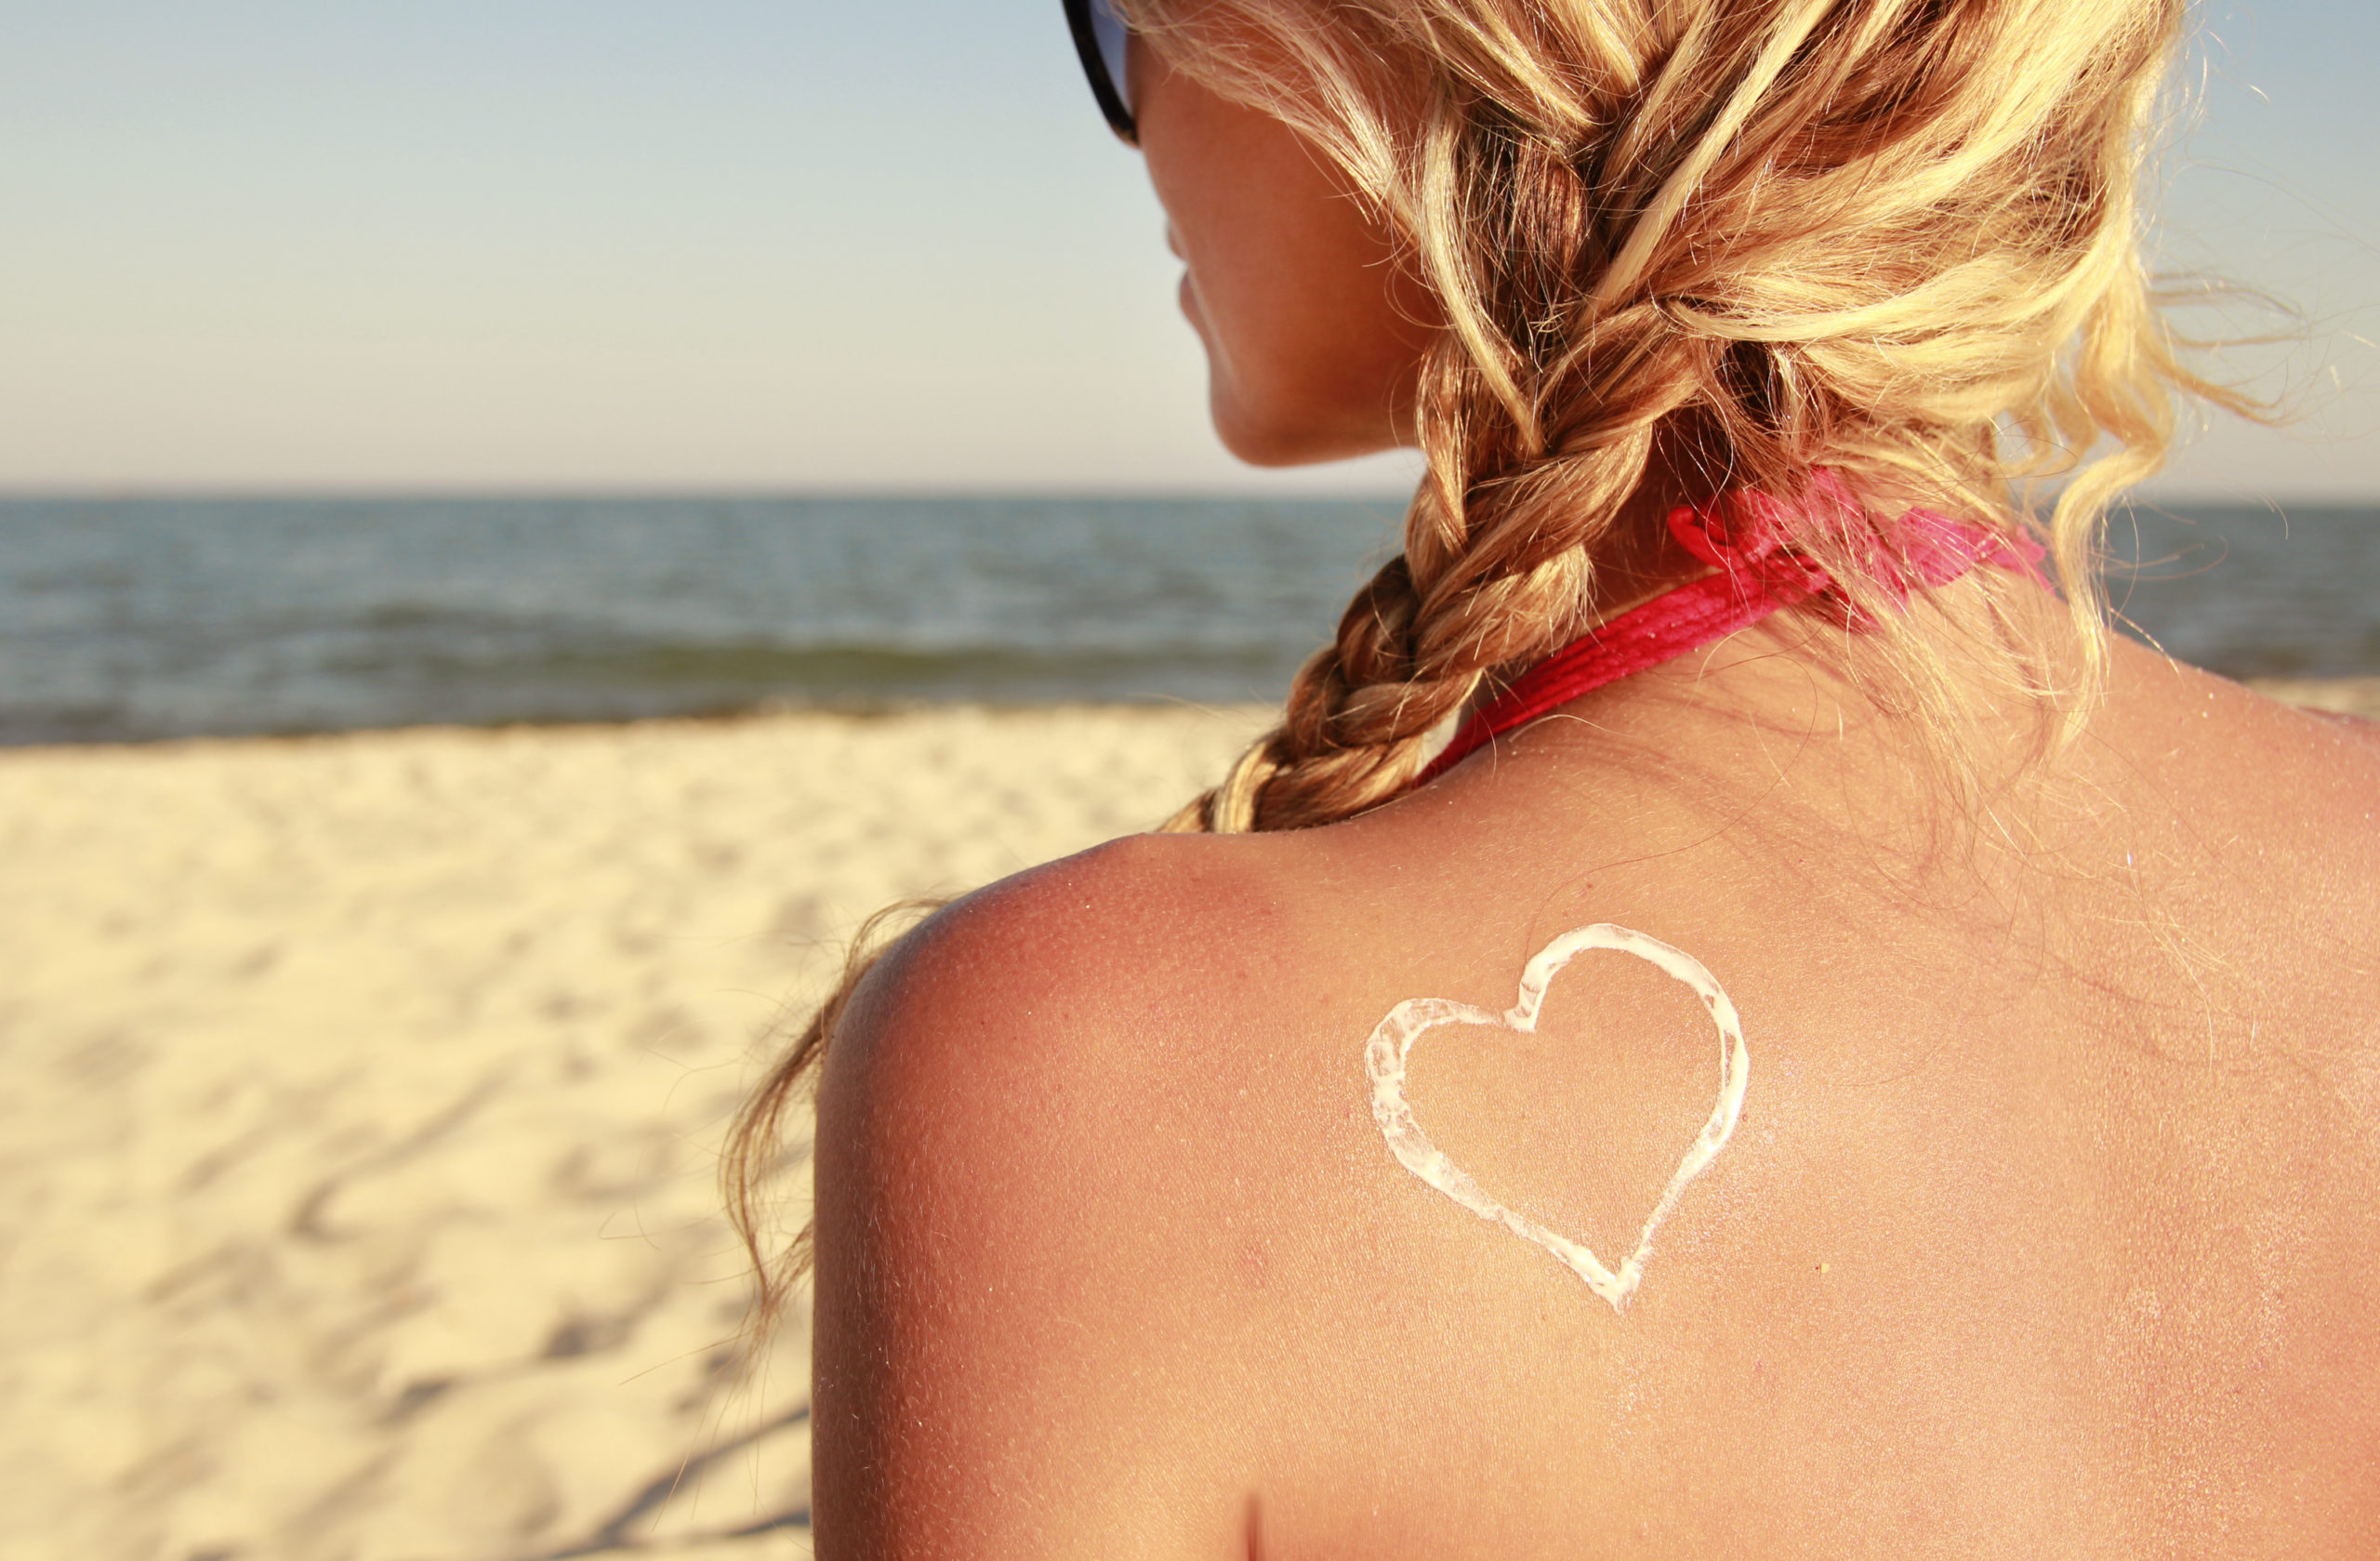 Caucasian woman looking out at the beach and has a zinc oxide SPF sunscreen applied on her back in the shape of a heart.